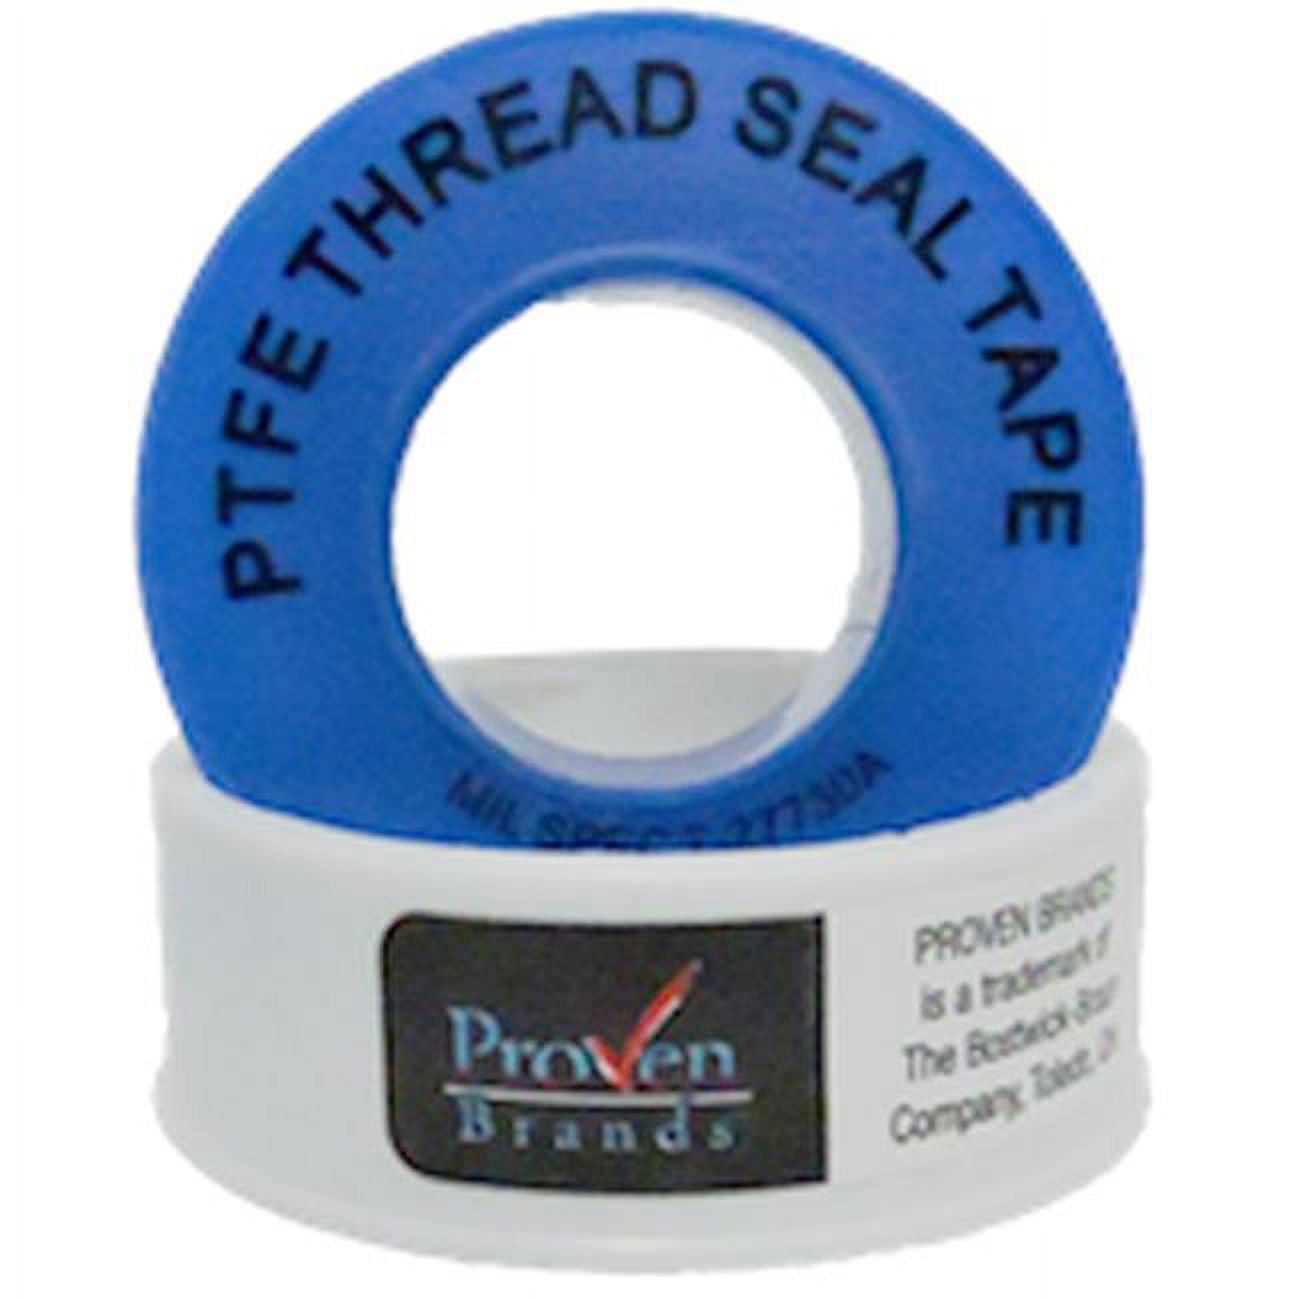 Proven Brands 1000 0.5 x 520 in. PTFE Thread Seal Tape